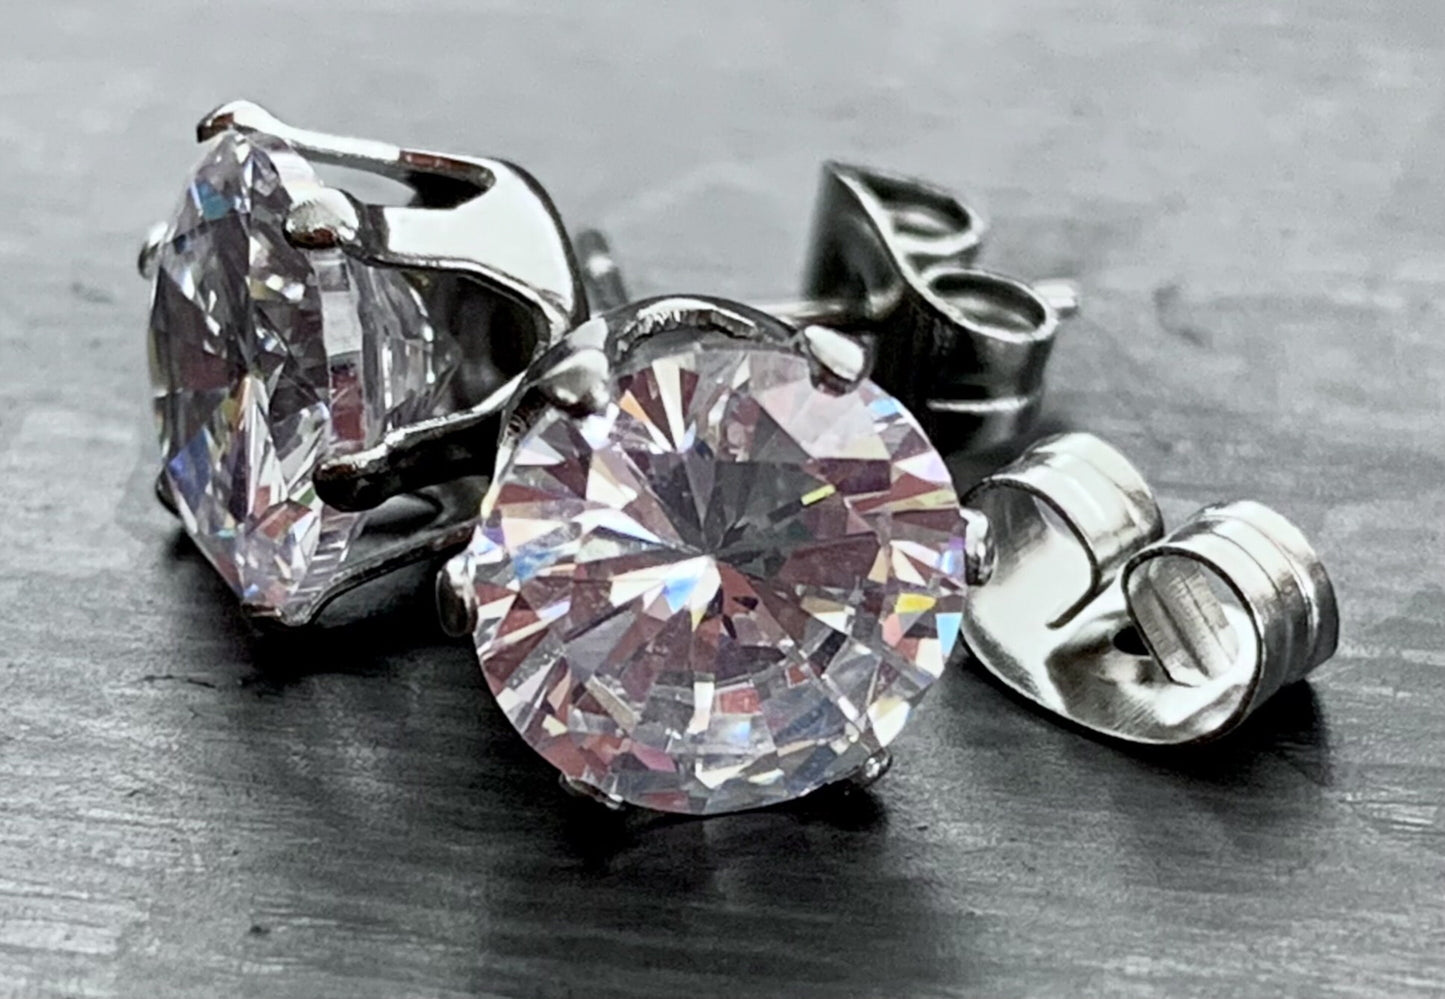 PAIR of Stunning Hypoallergenic Prong Set CZ Gem 316L Surgical Steel Stud Earrings - 2mm thru 10mm Available!